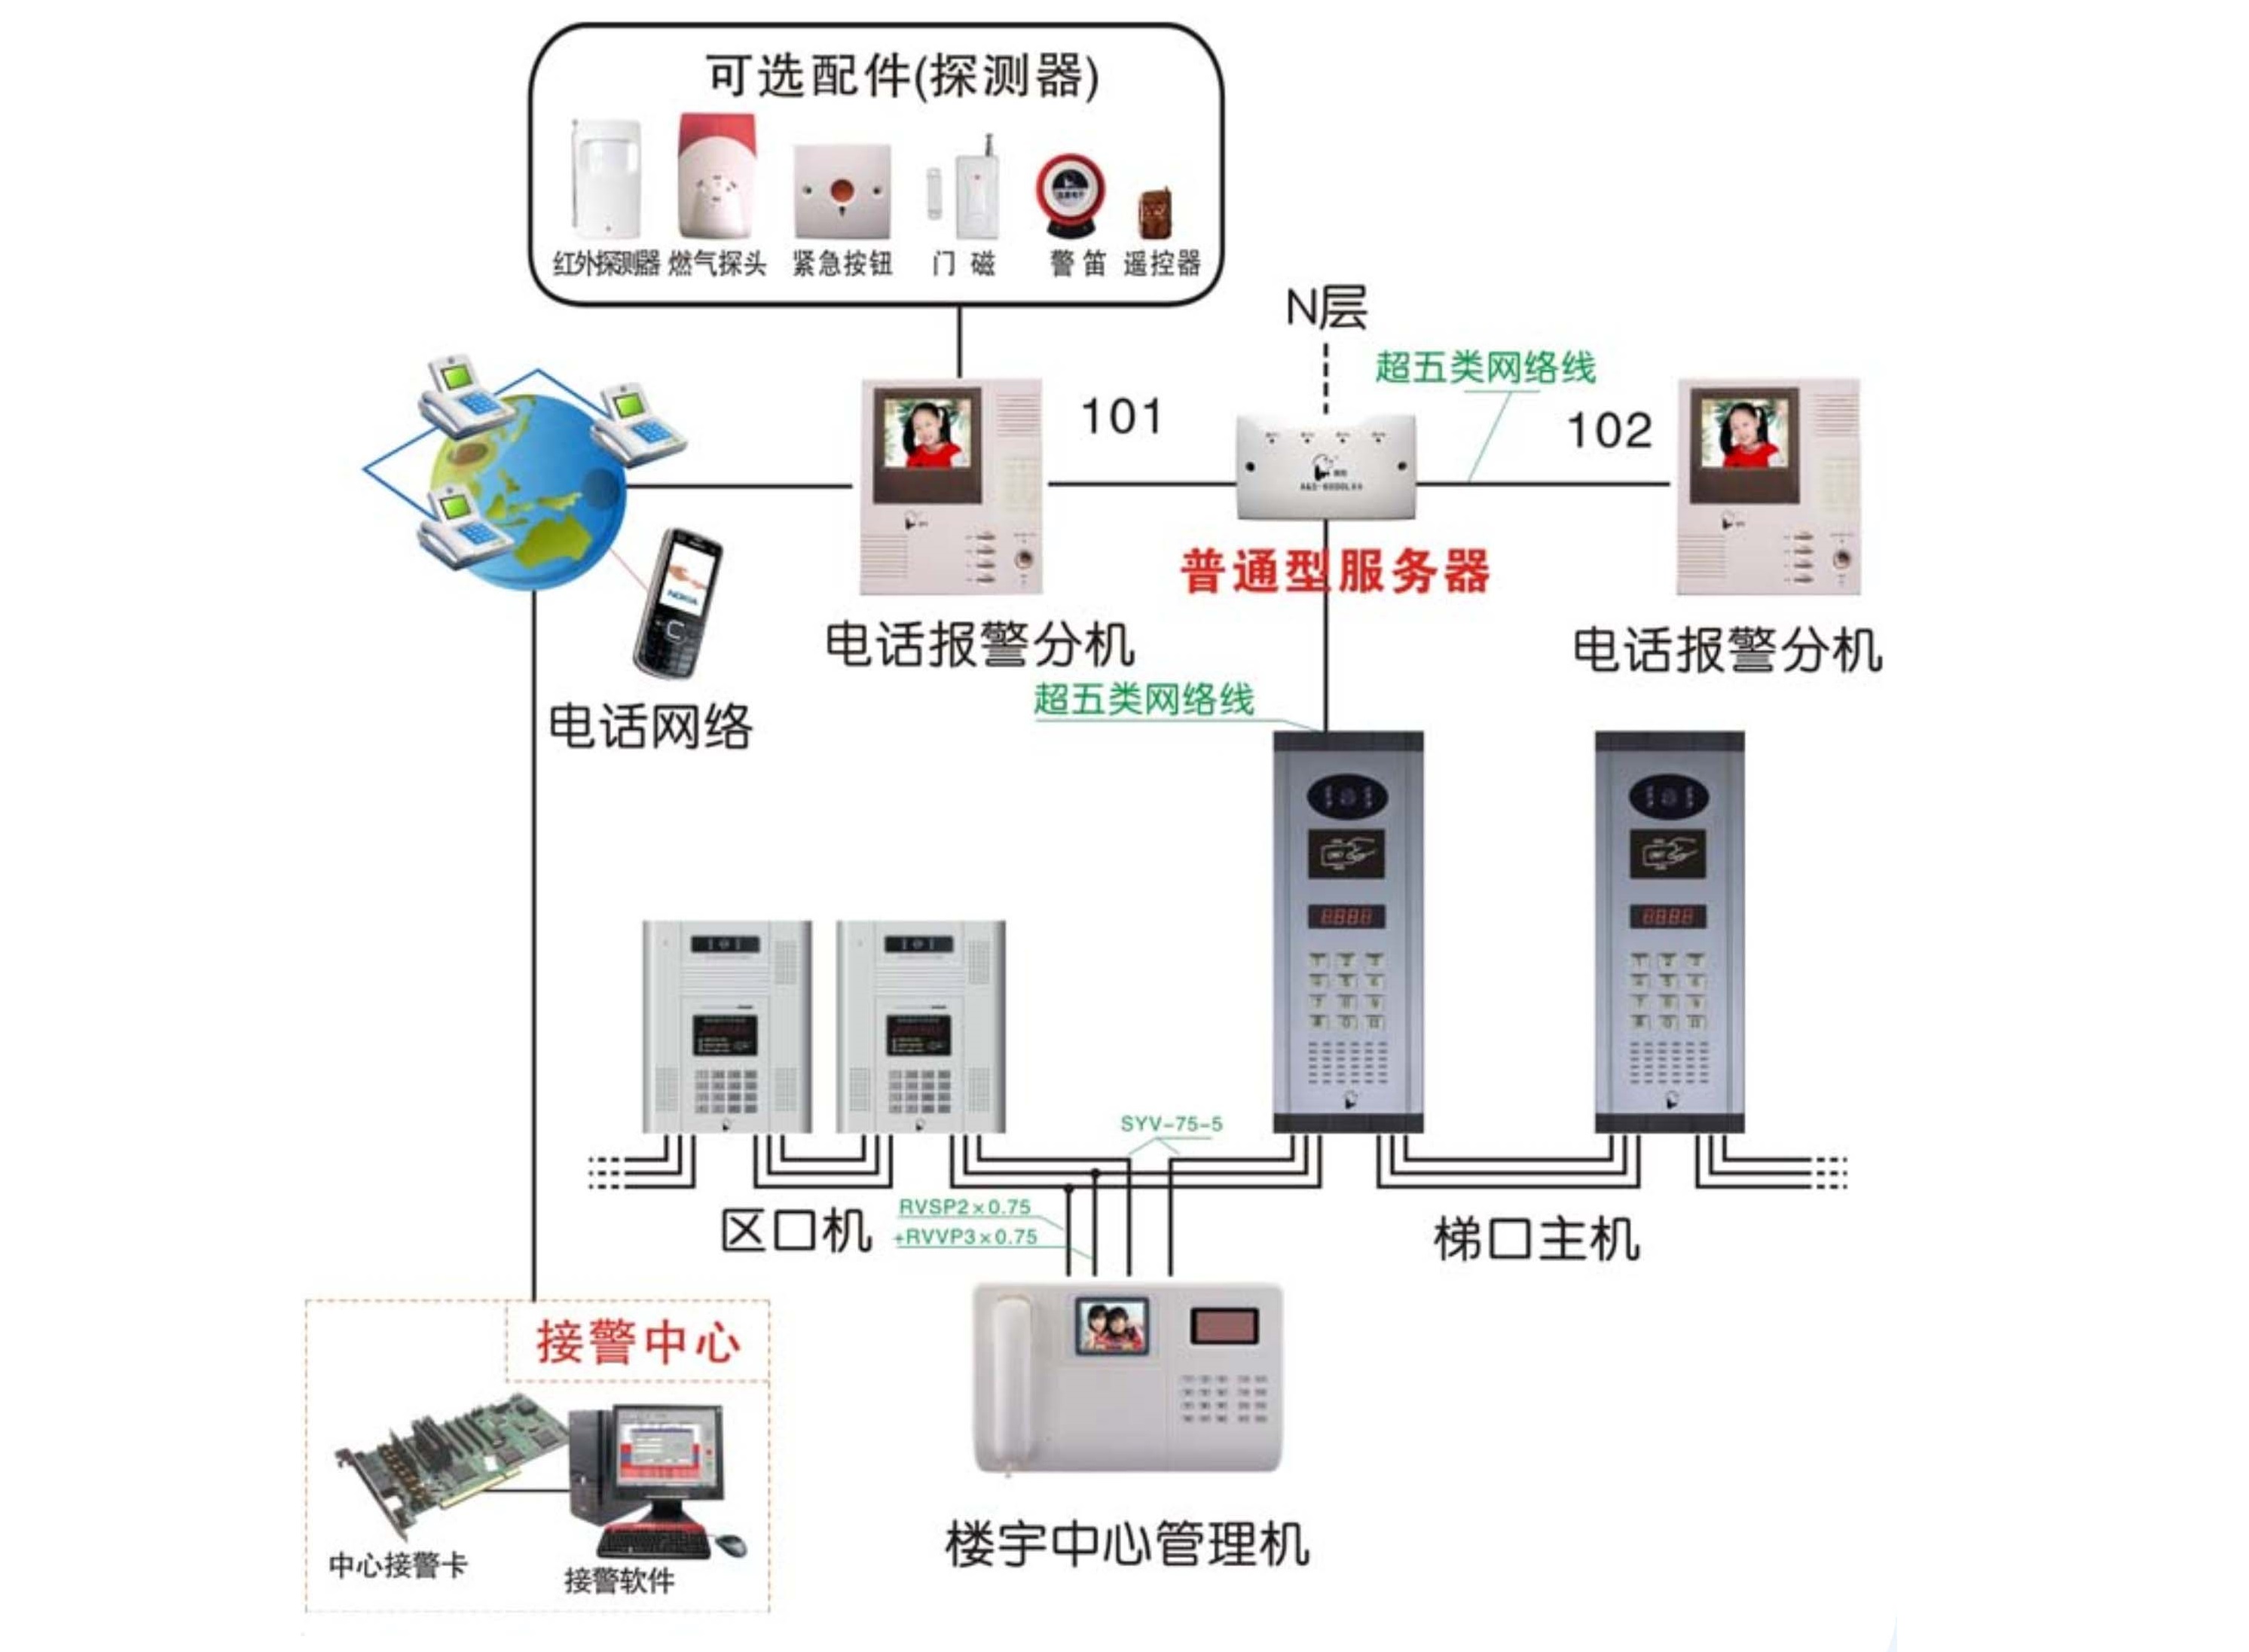 Integration of access control and alarm